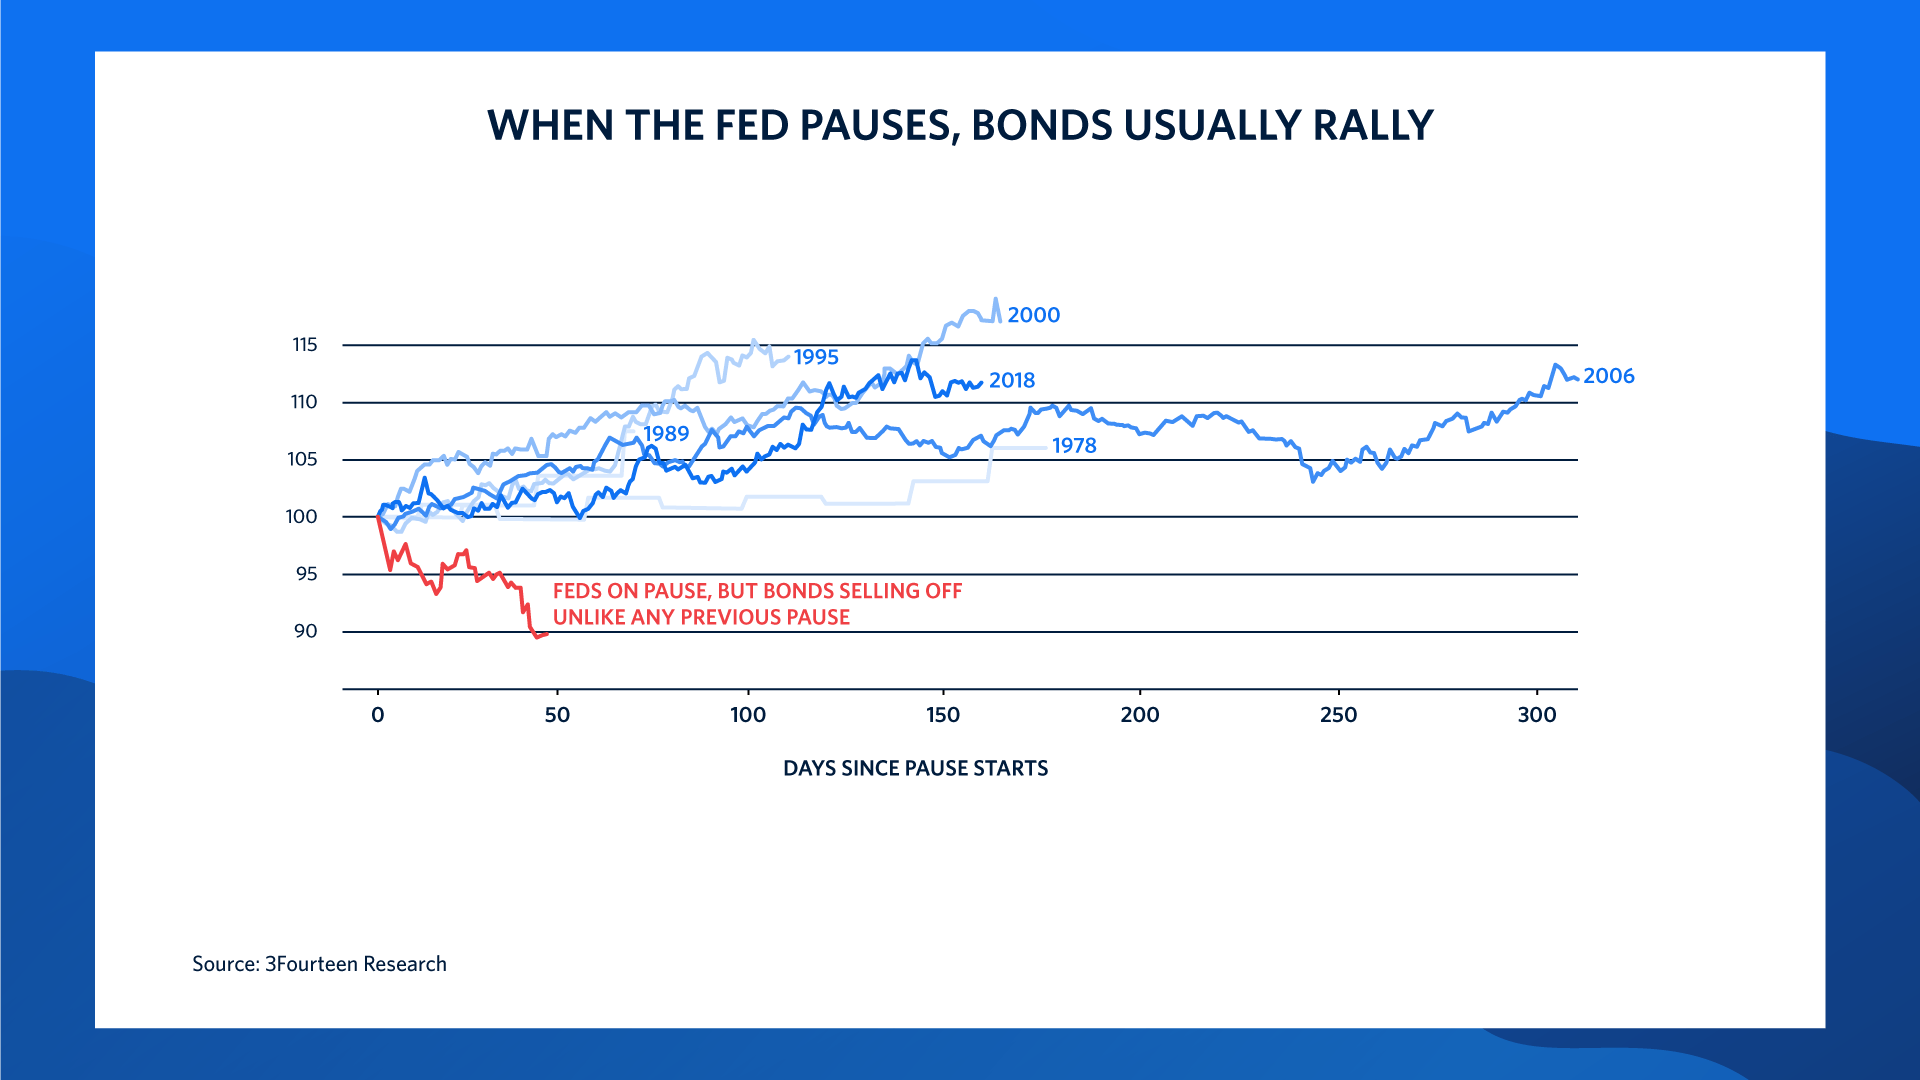 Chart 1: A graph showing bond prices rallying after Federal Reserve rate-hike cycle pauses in 1978, 1989, 1995, 2000, 2006, 2018. The graph shows that unlike previous pauses, the current rate-hike cycle pause has seen bonds being sold off. 